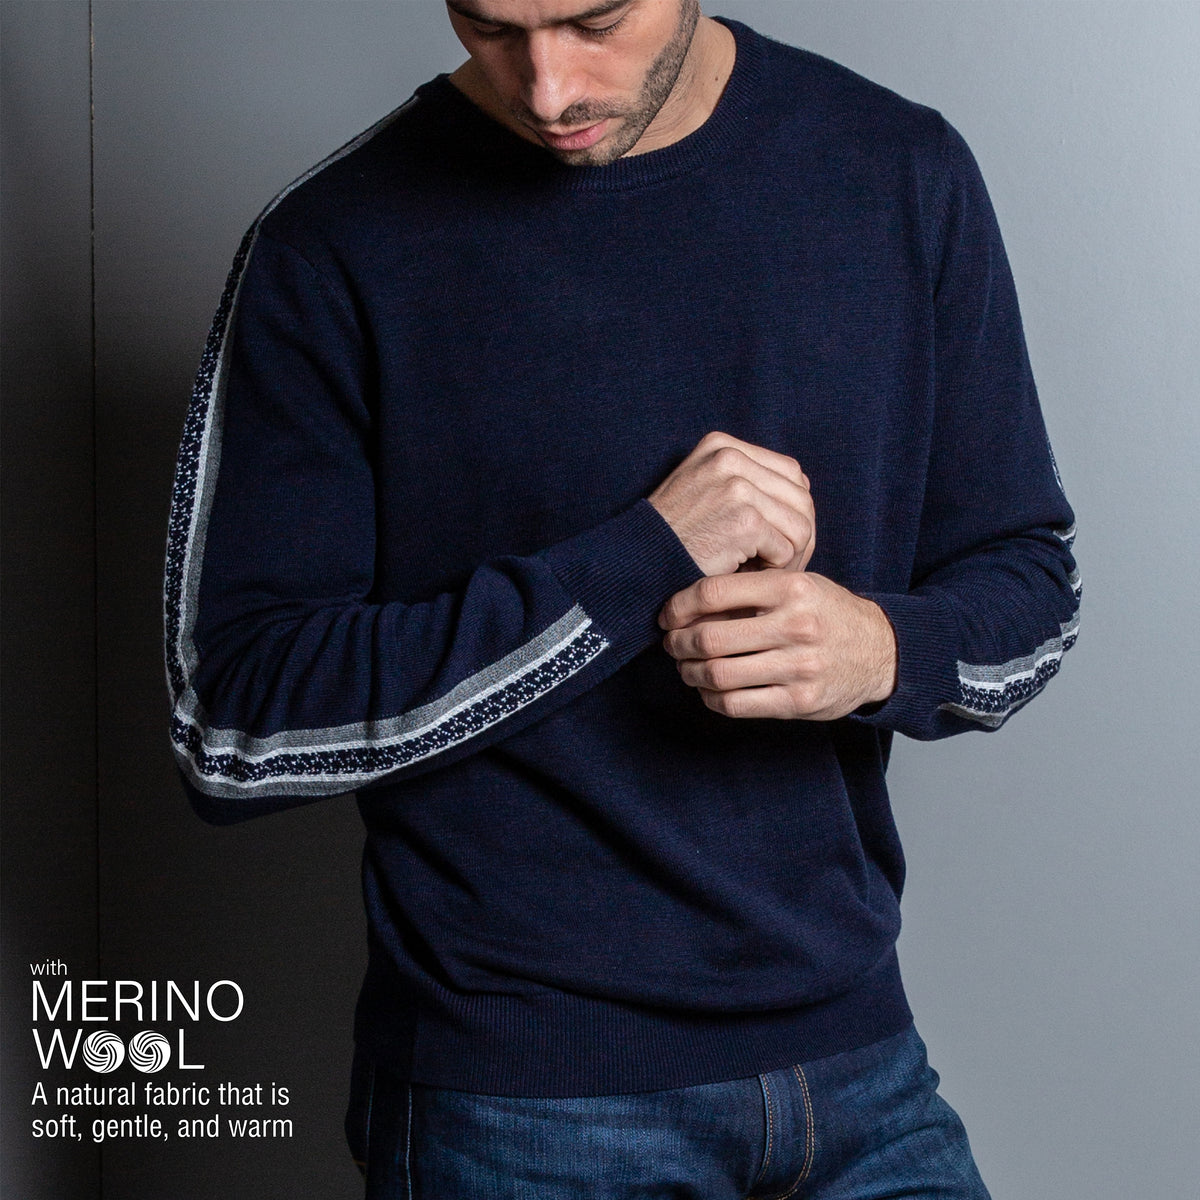 Side Stripes Crew Jumper with Merino Wool